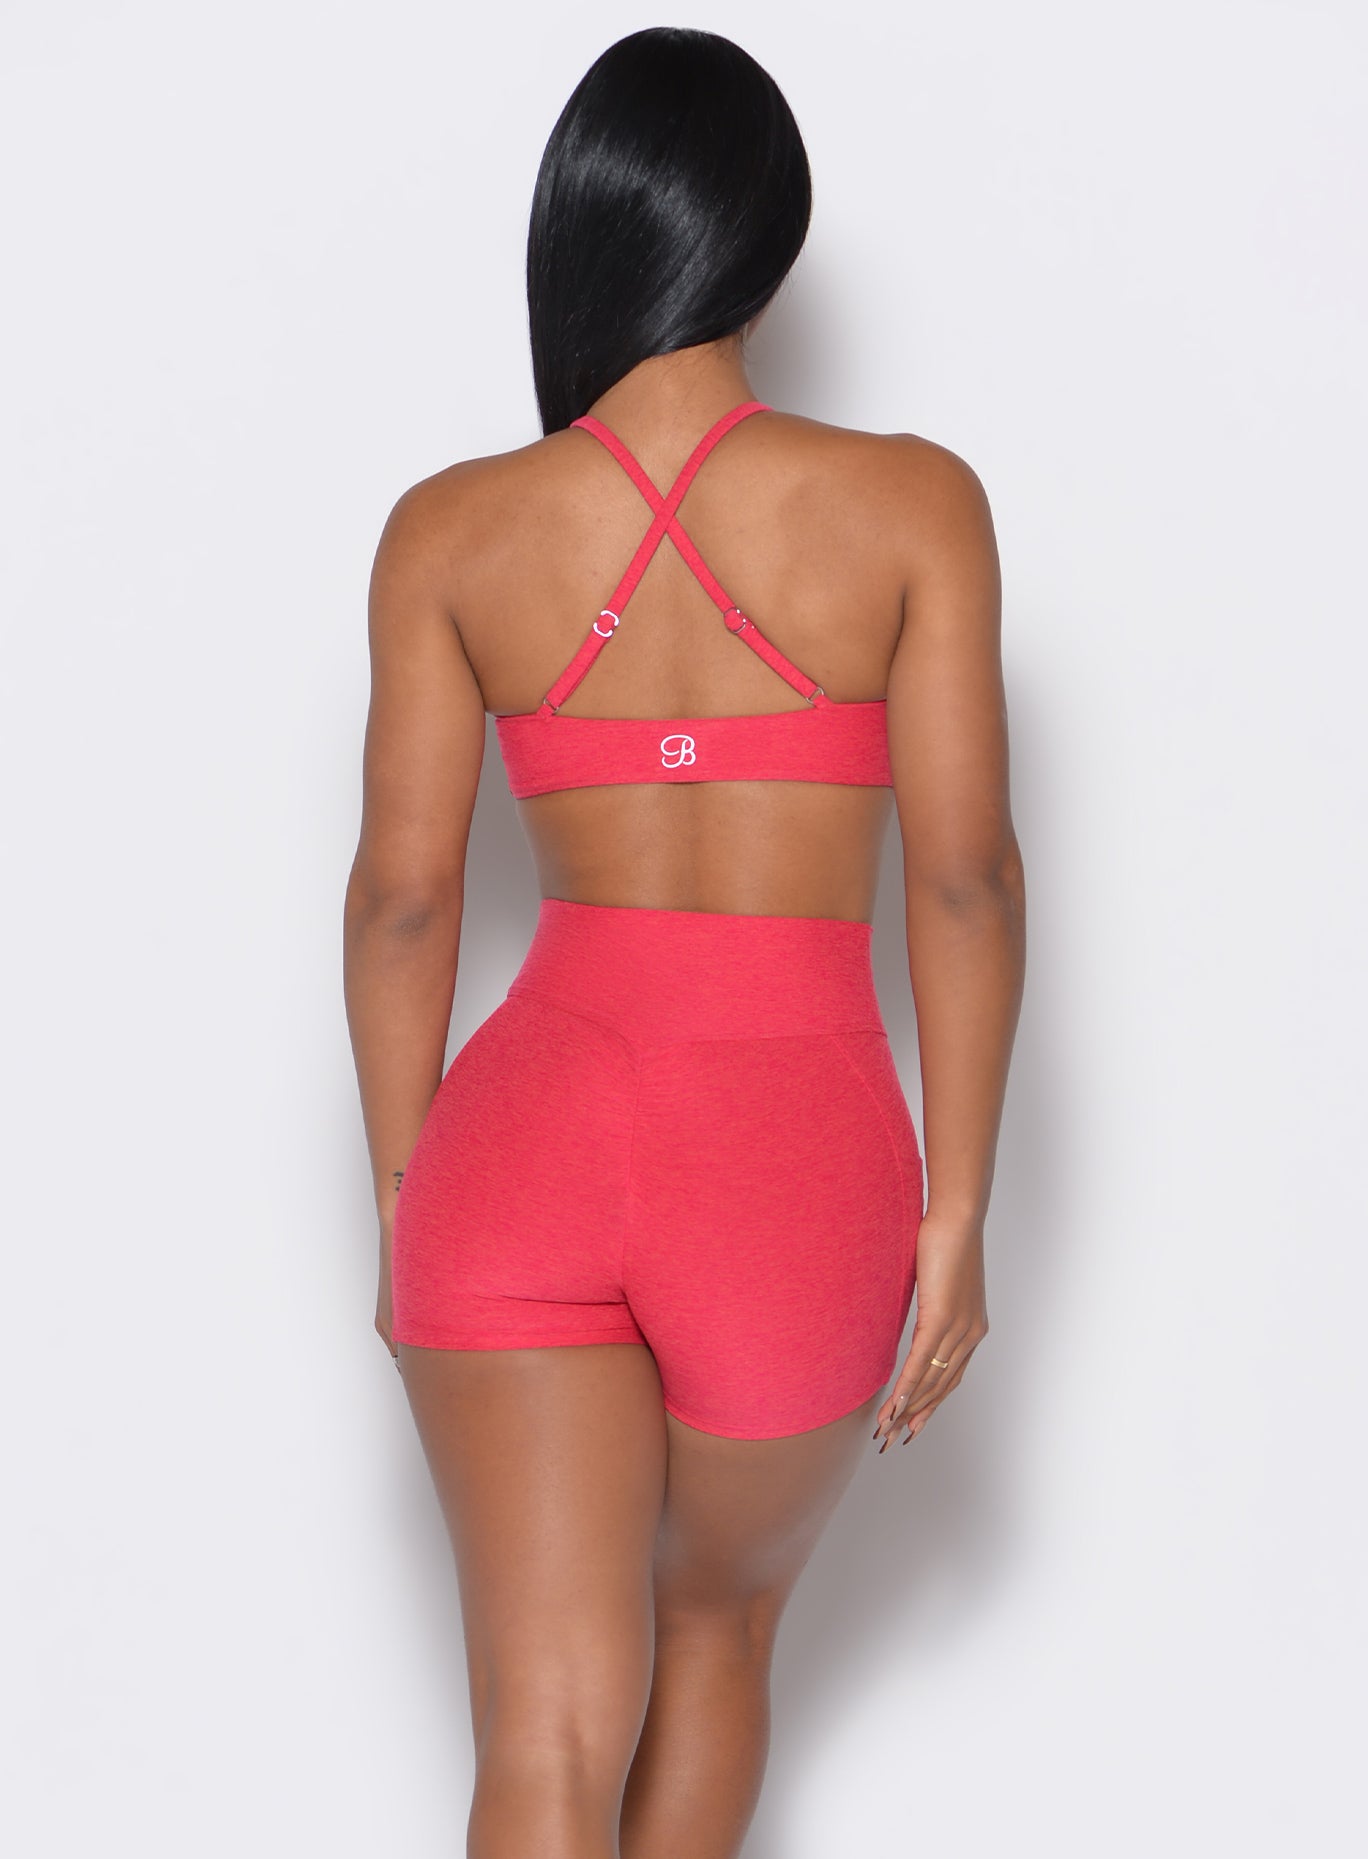 Back profile view of a model wearing our twist mini bra in Raspberry Punch color along with a matching shorts